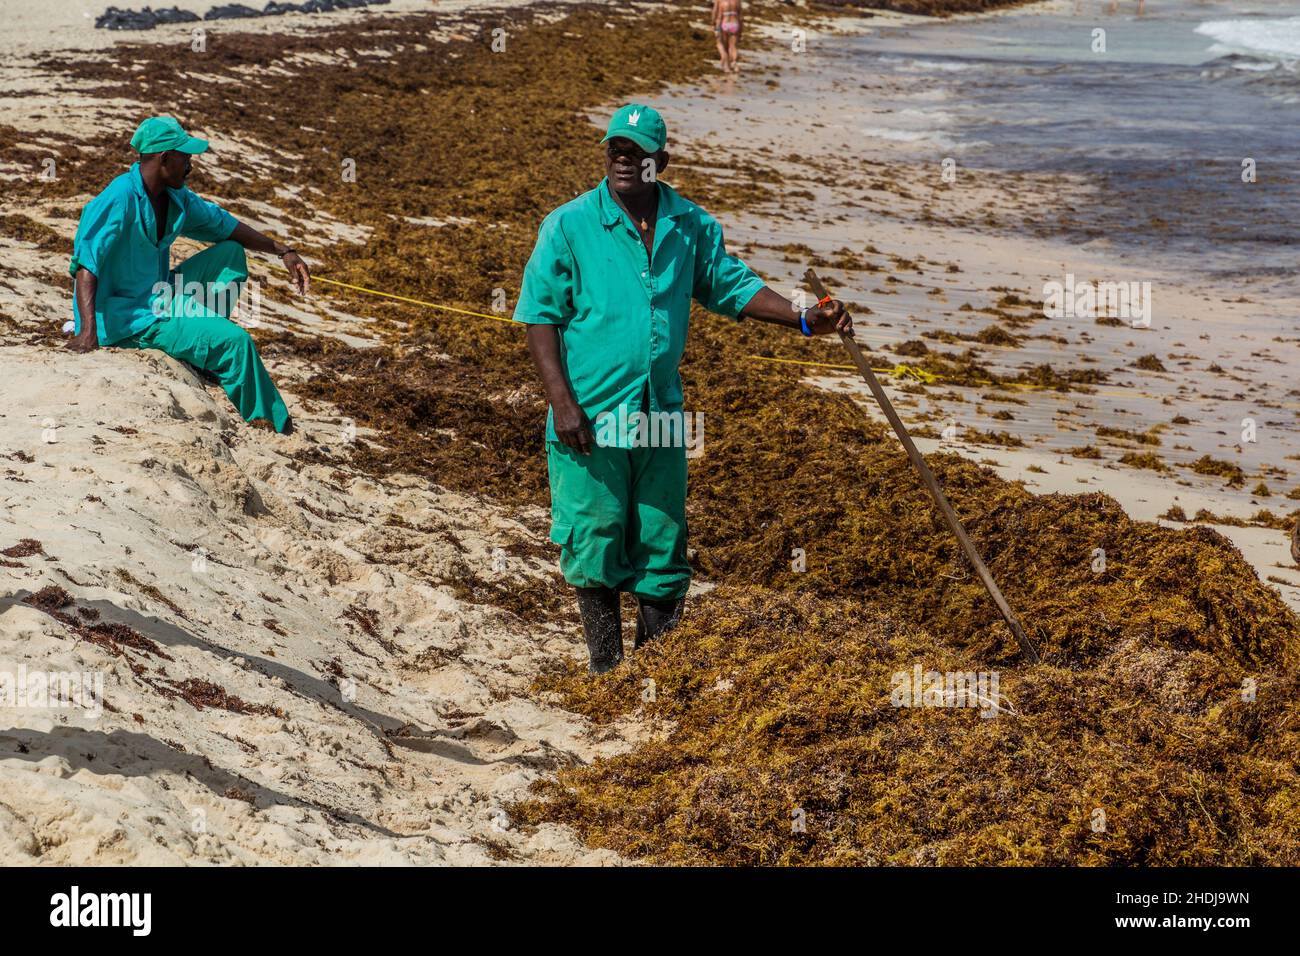 PUNTA CANA, DOMINICAN REPUBLIC - DECEMBER 8, 2018: Workers clean seaweed at Bavaro beach, Dominican Republic Stock Photo